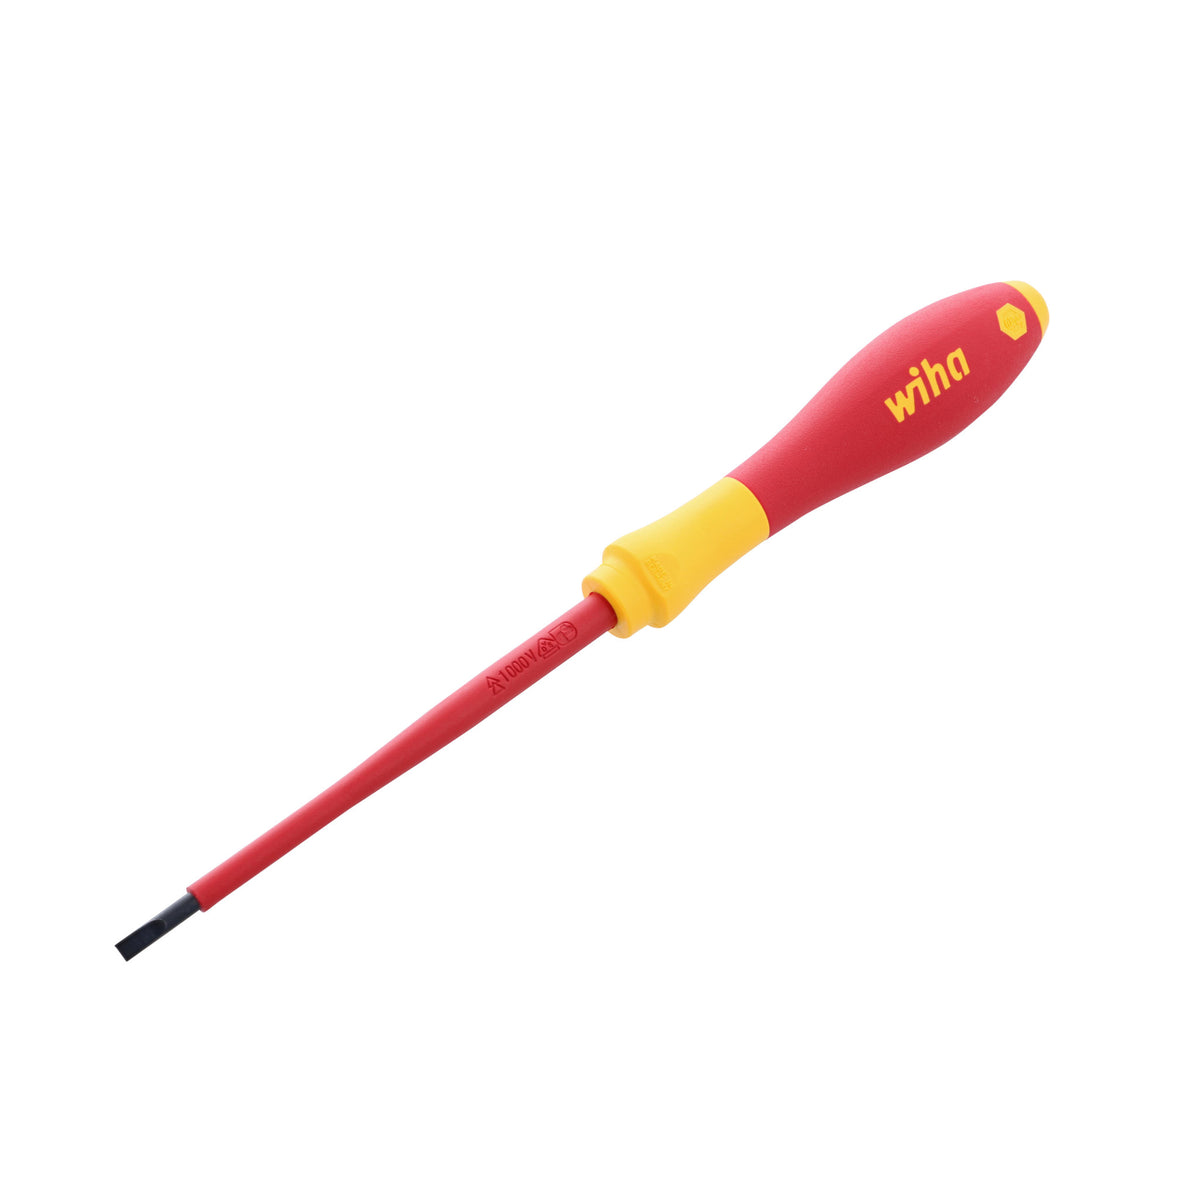 slotted screwdriver